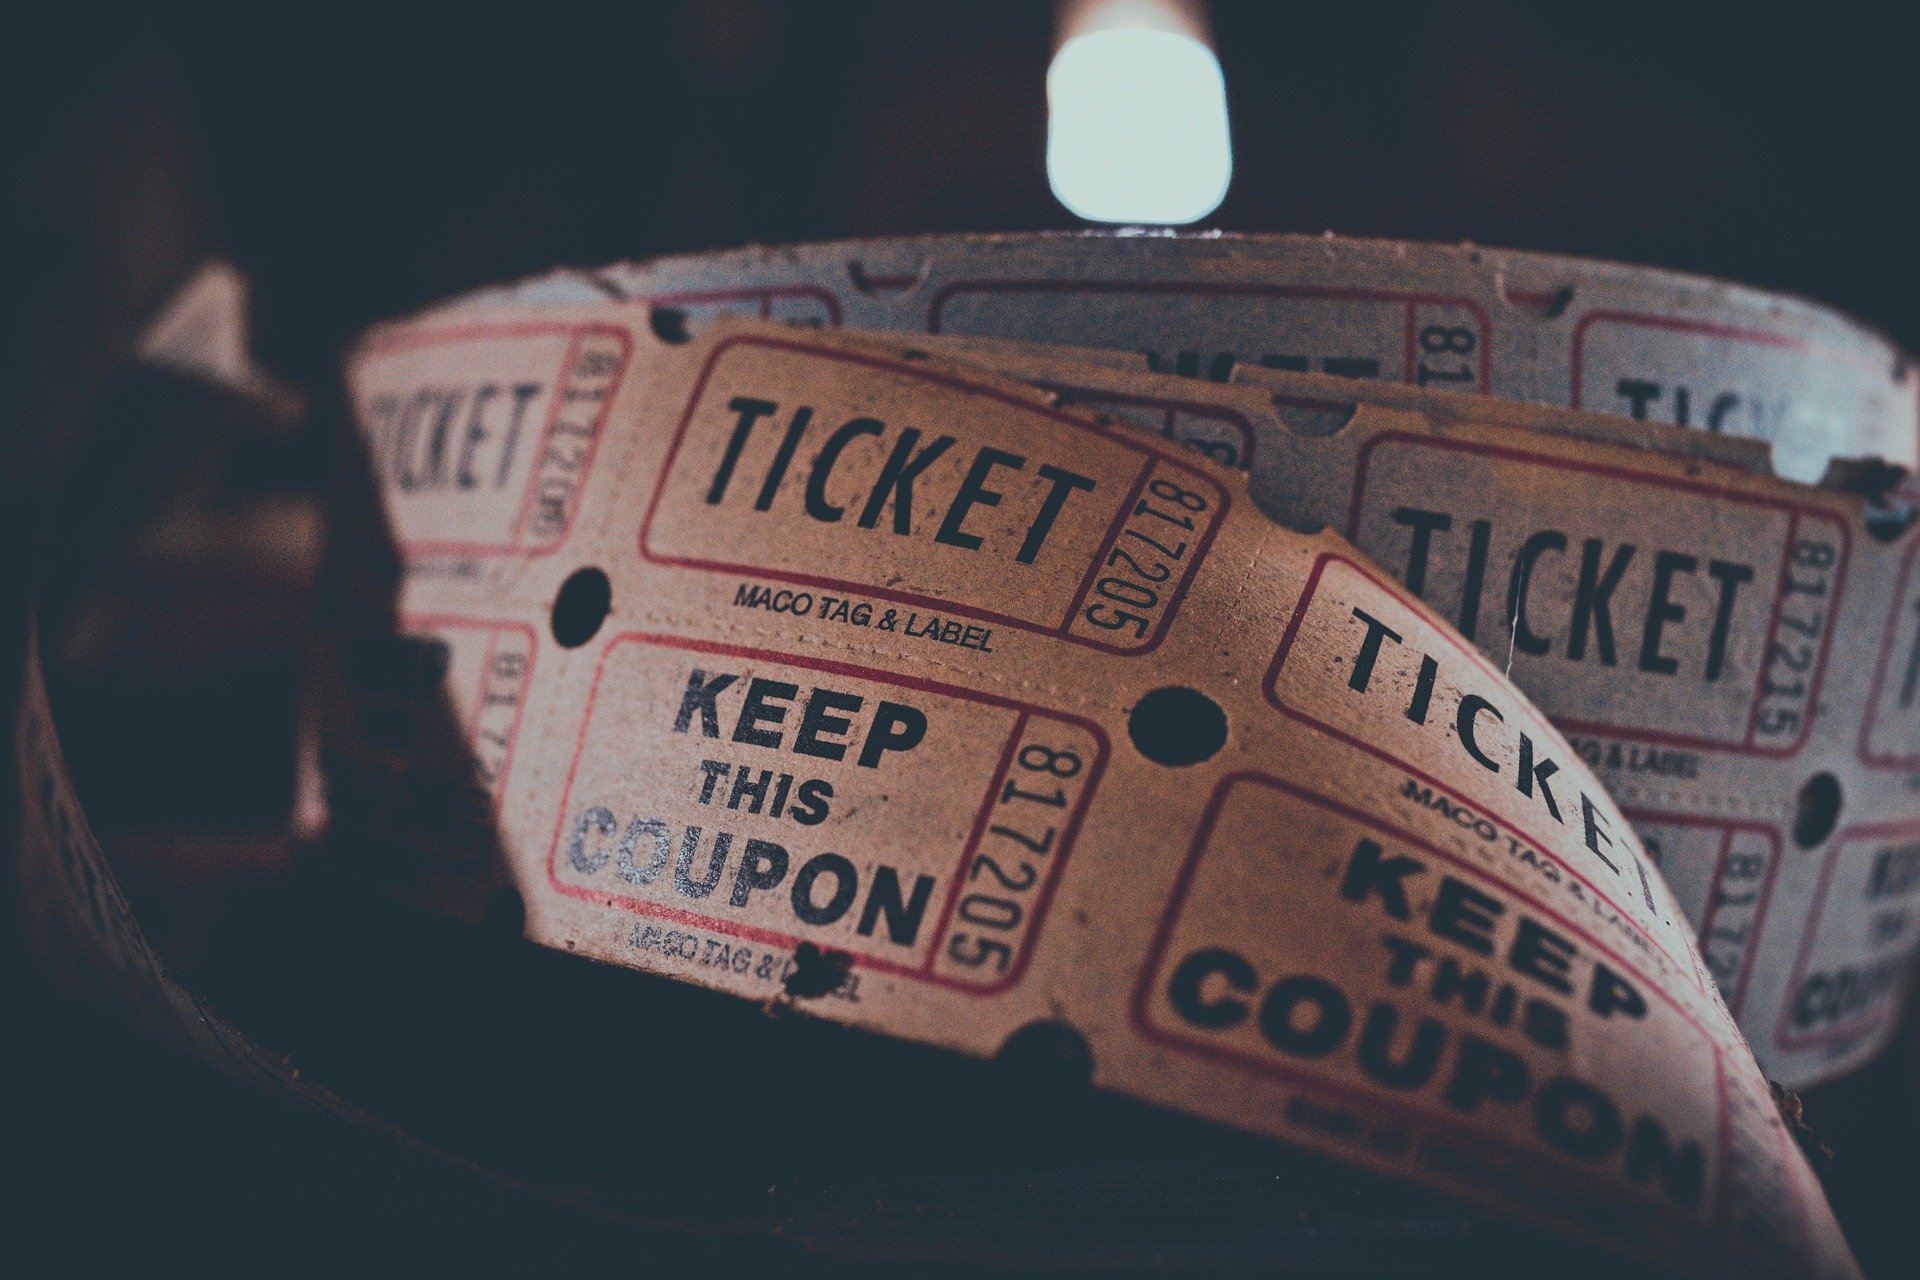 A roll of old fashion cinema tickets on a table with a dark background.